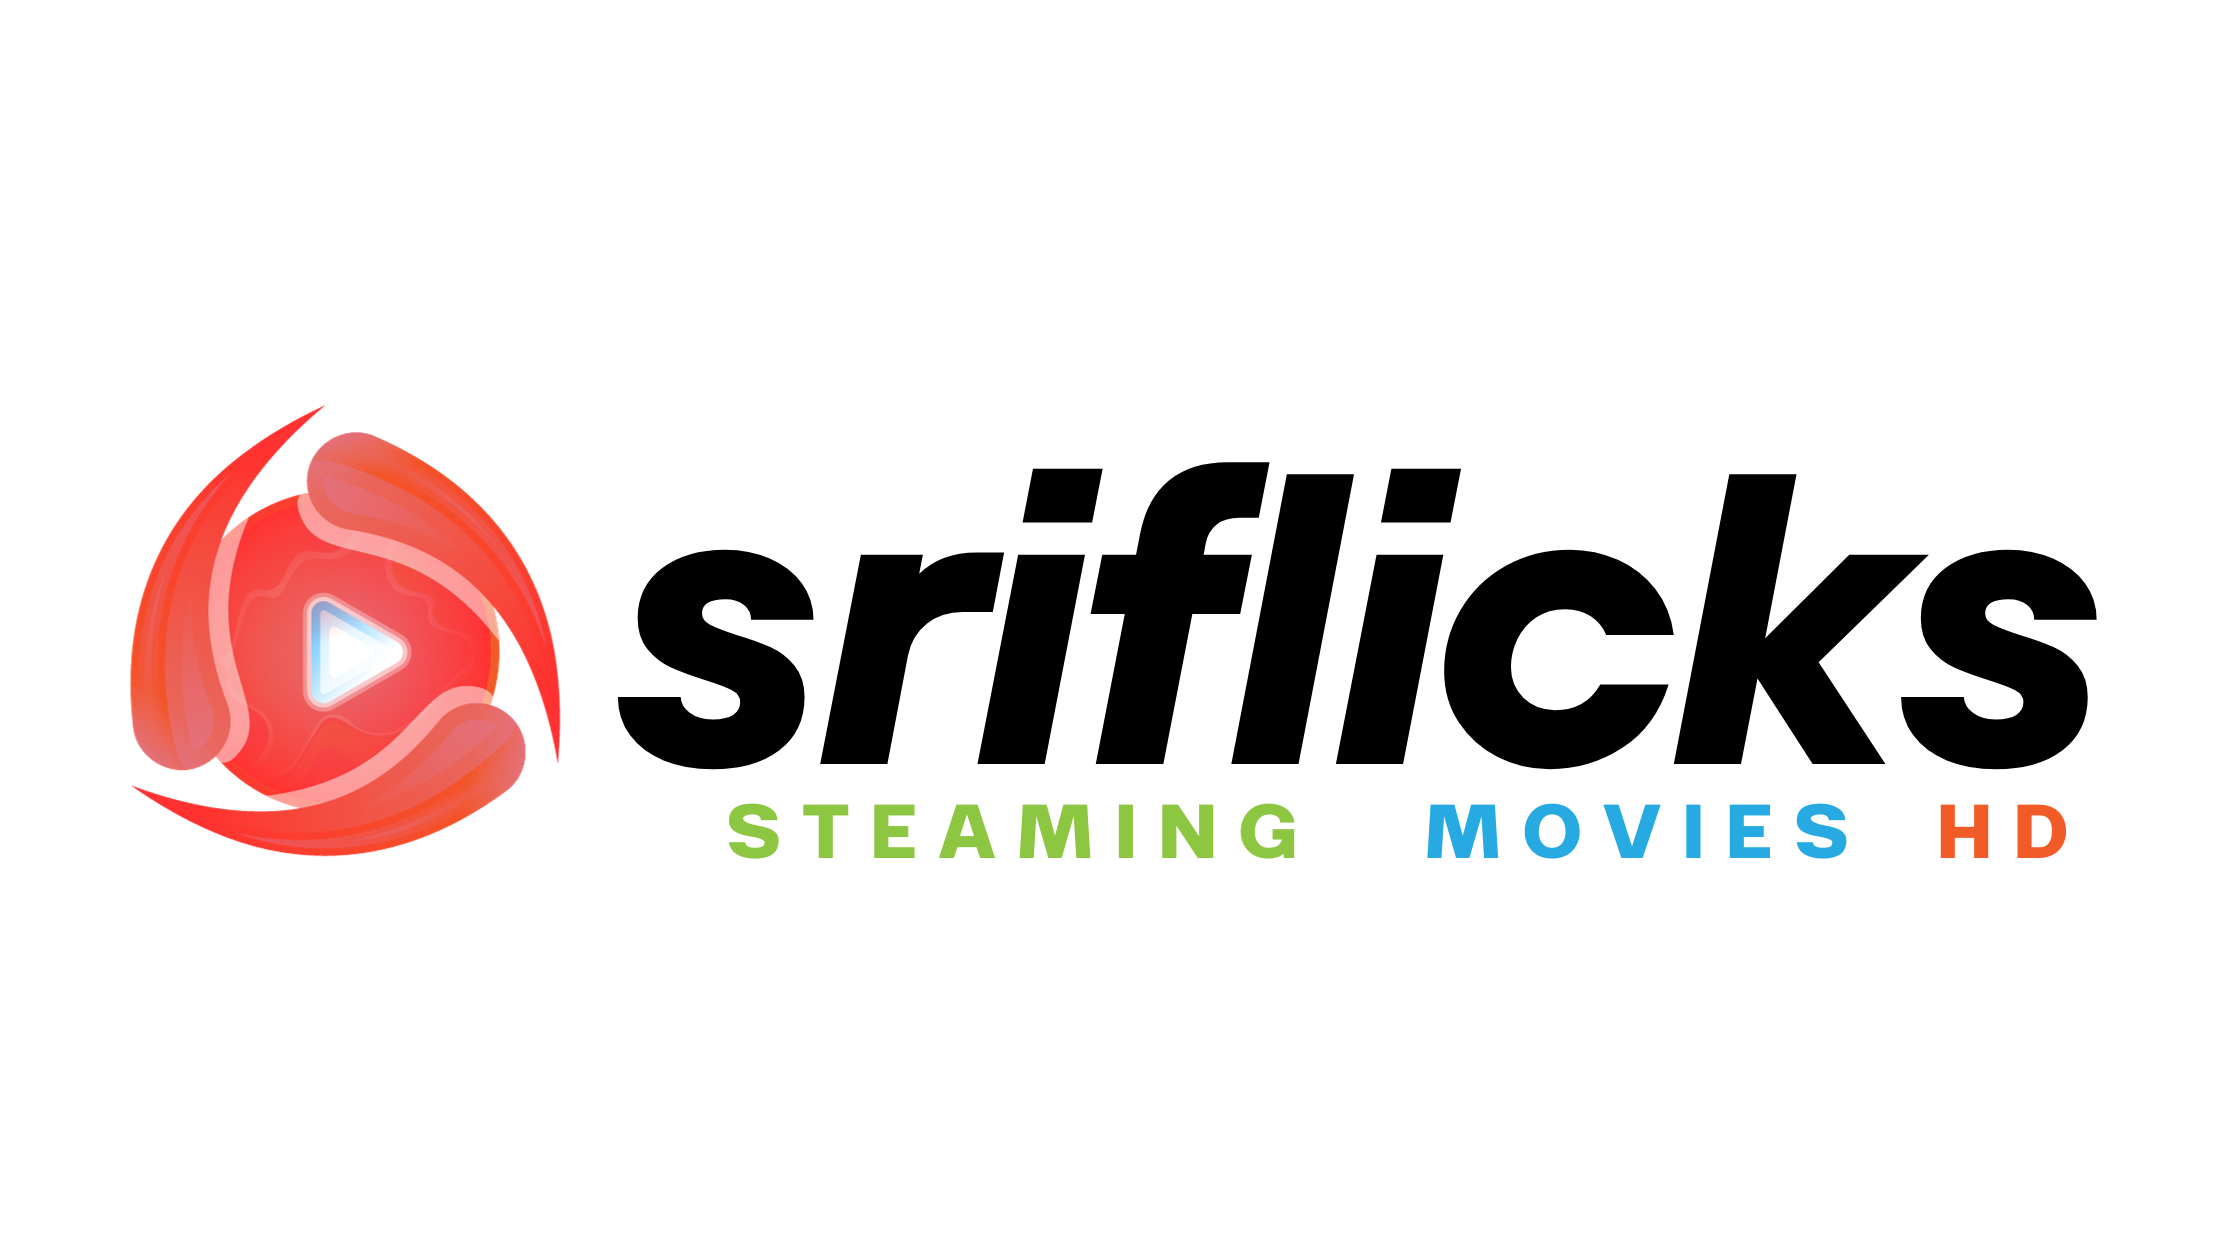 watch movie online at home on sriflicks